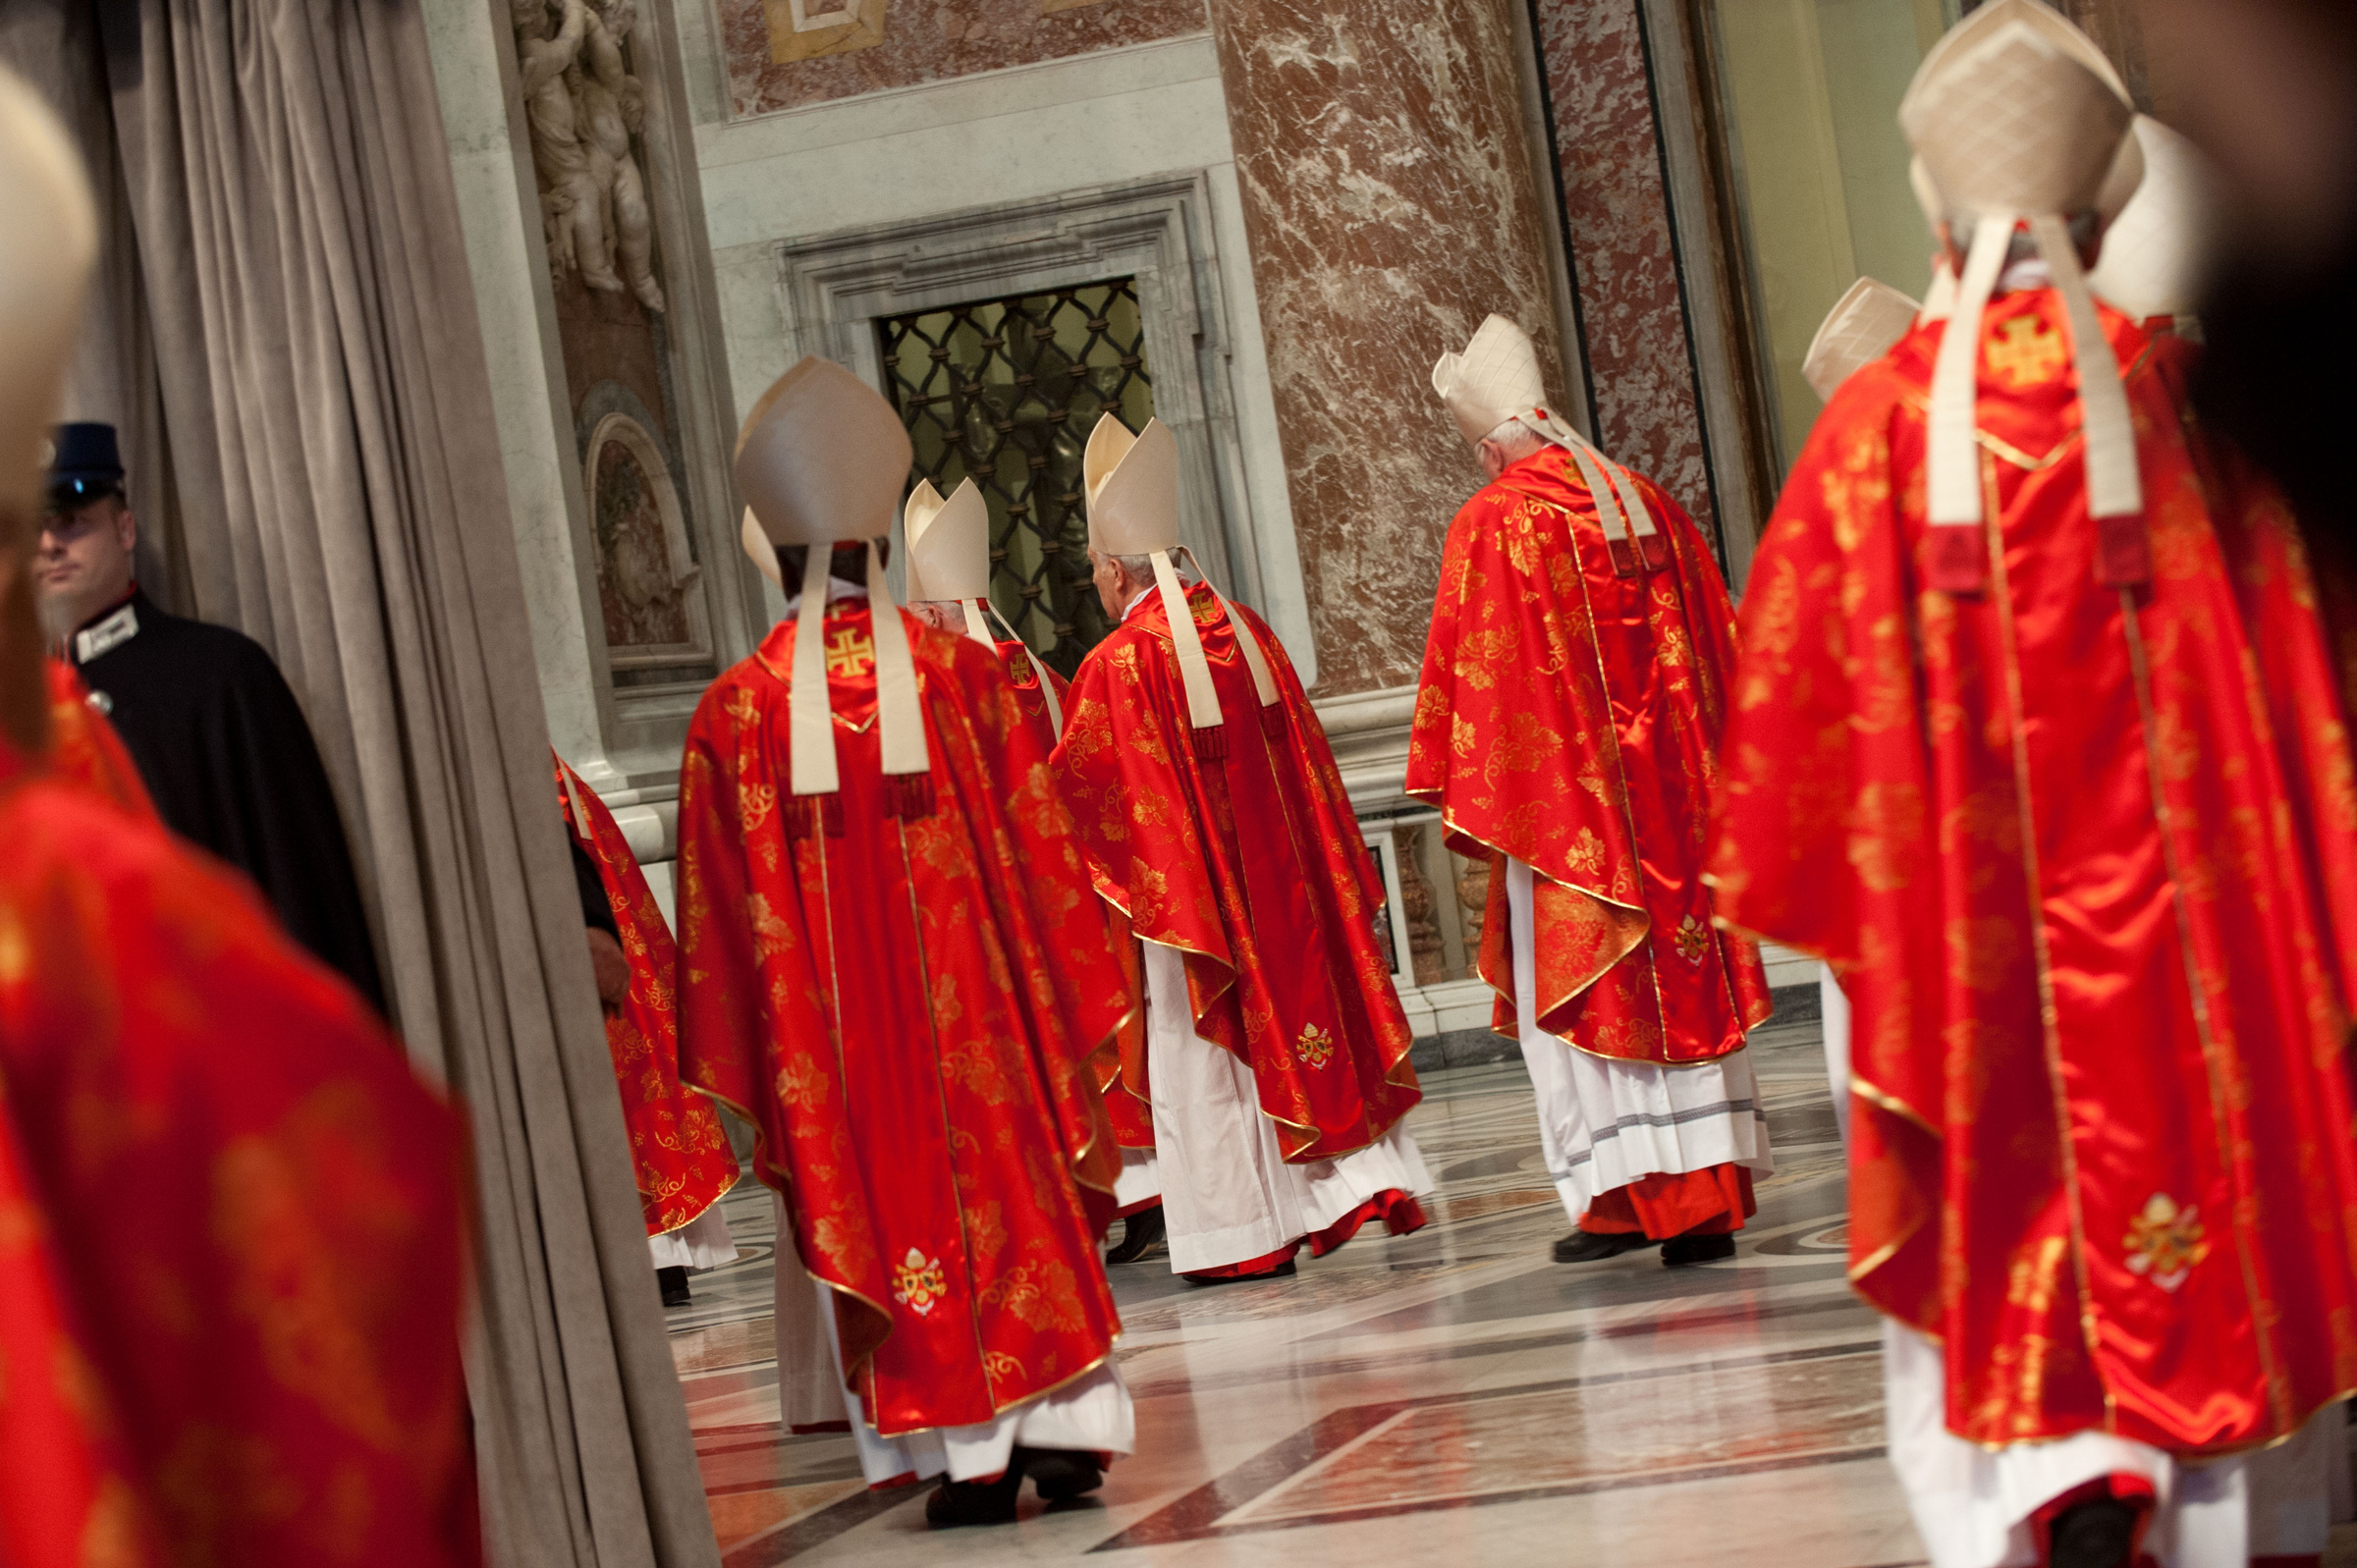 Cardinals enter 'Pro Eligendo Pontifice' mass at the St Peter's basilica on March 12, 2013, at the Vatican. RNS photo by Andrea Sabbadini